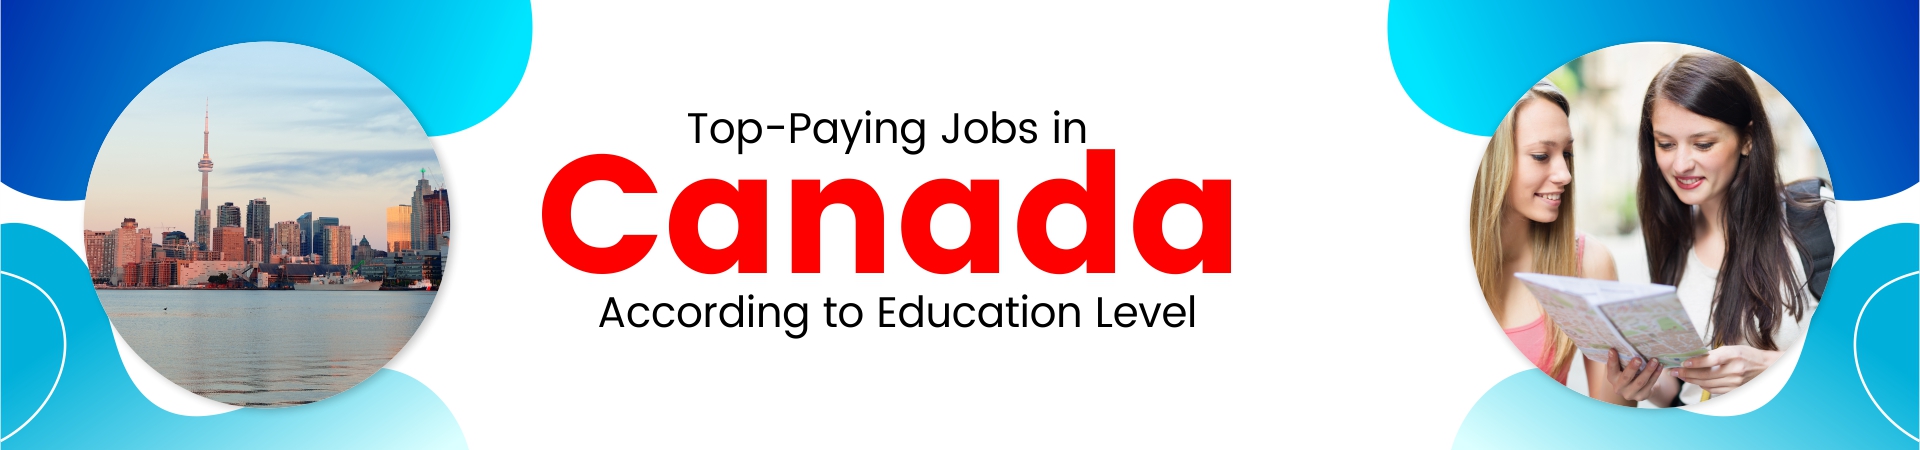 Top-Paying Jobs in Canada According to Education Level